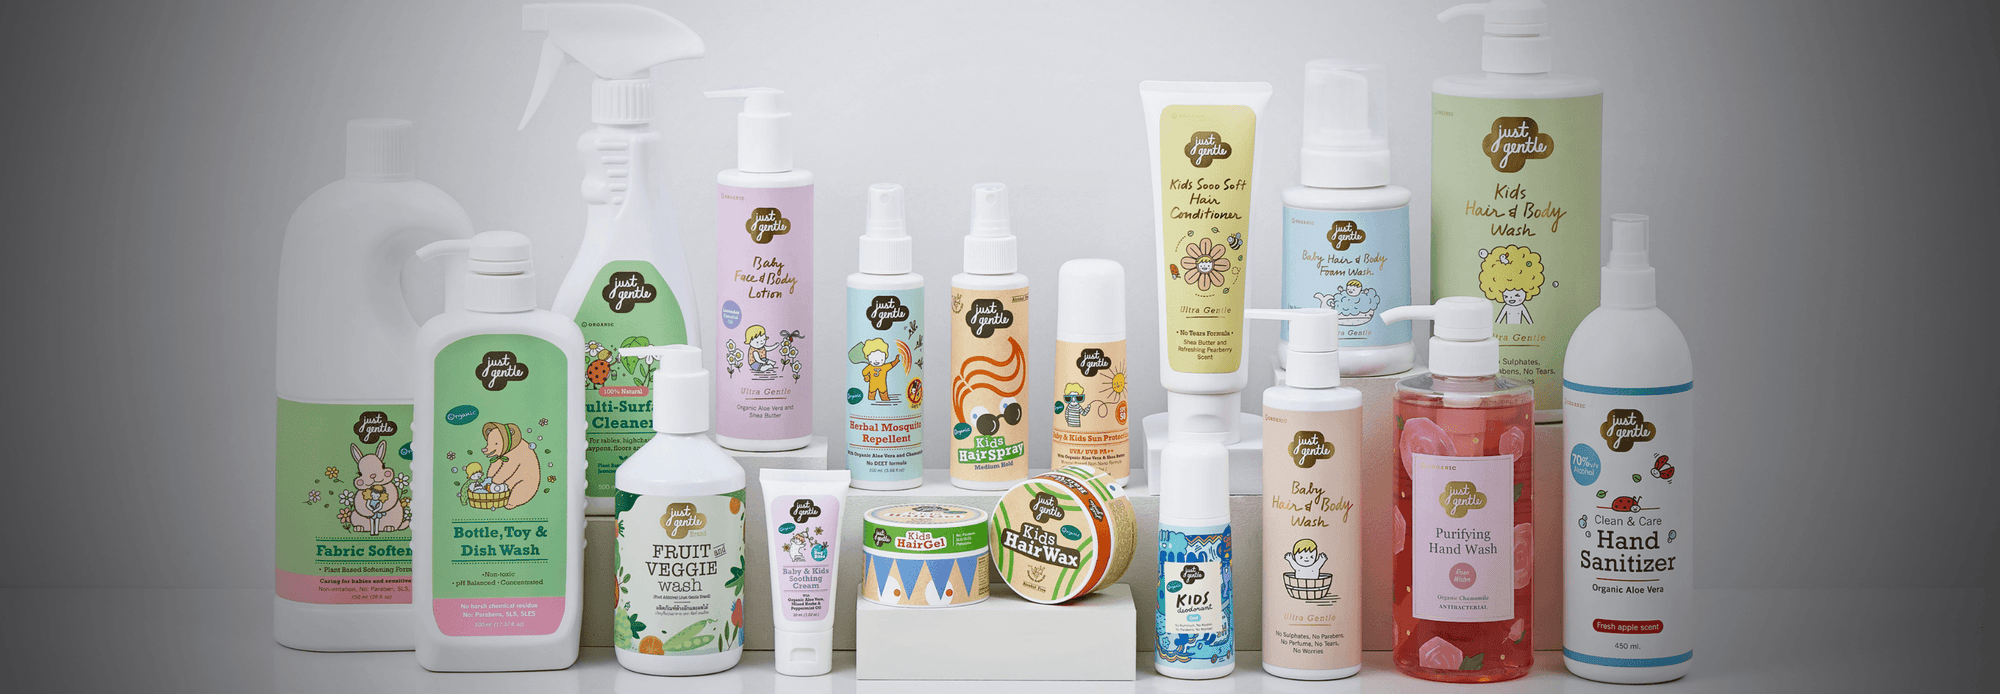 Just Gentle Organic Product Range- Natural and Organic Personal Care for Babies and Kids_1